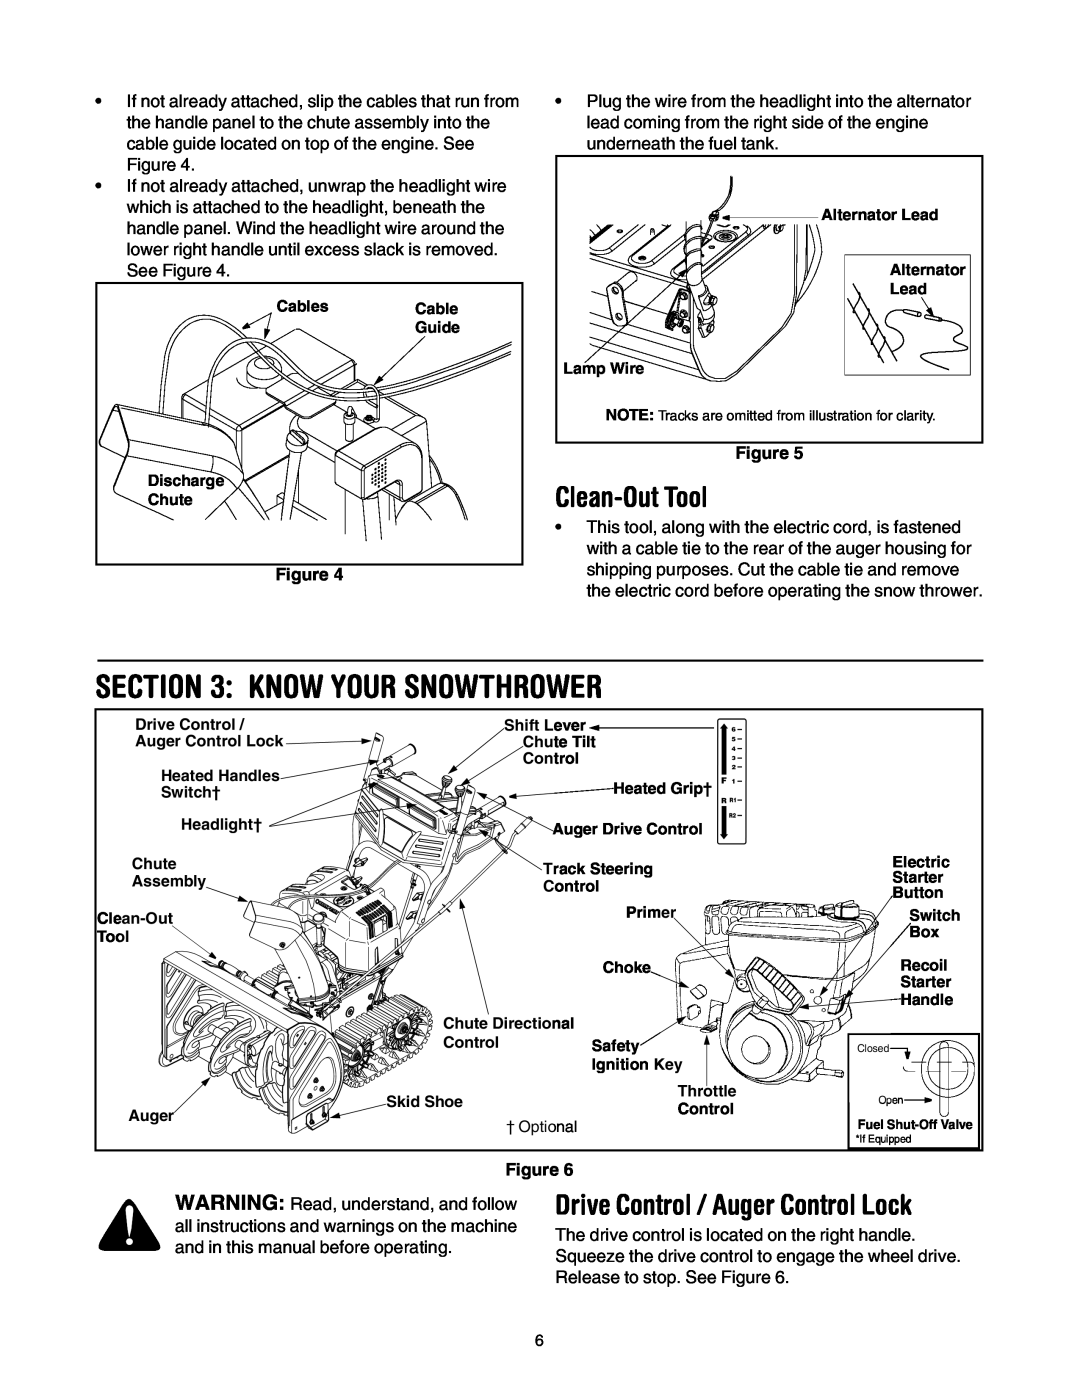 Troy-Bilt OEM-390-679 manual Know Your Snowthrower, Clean-OutTool, Drive Control / Auger Control Lock 